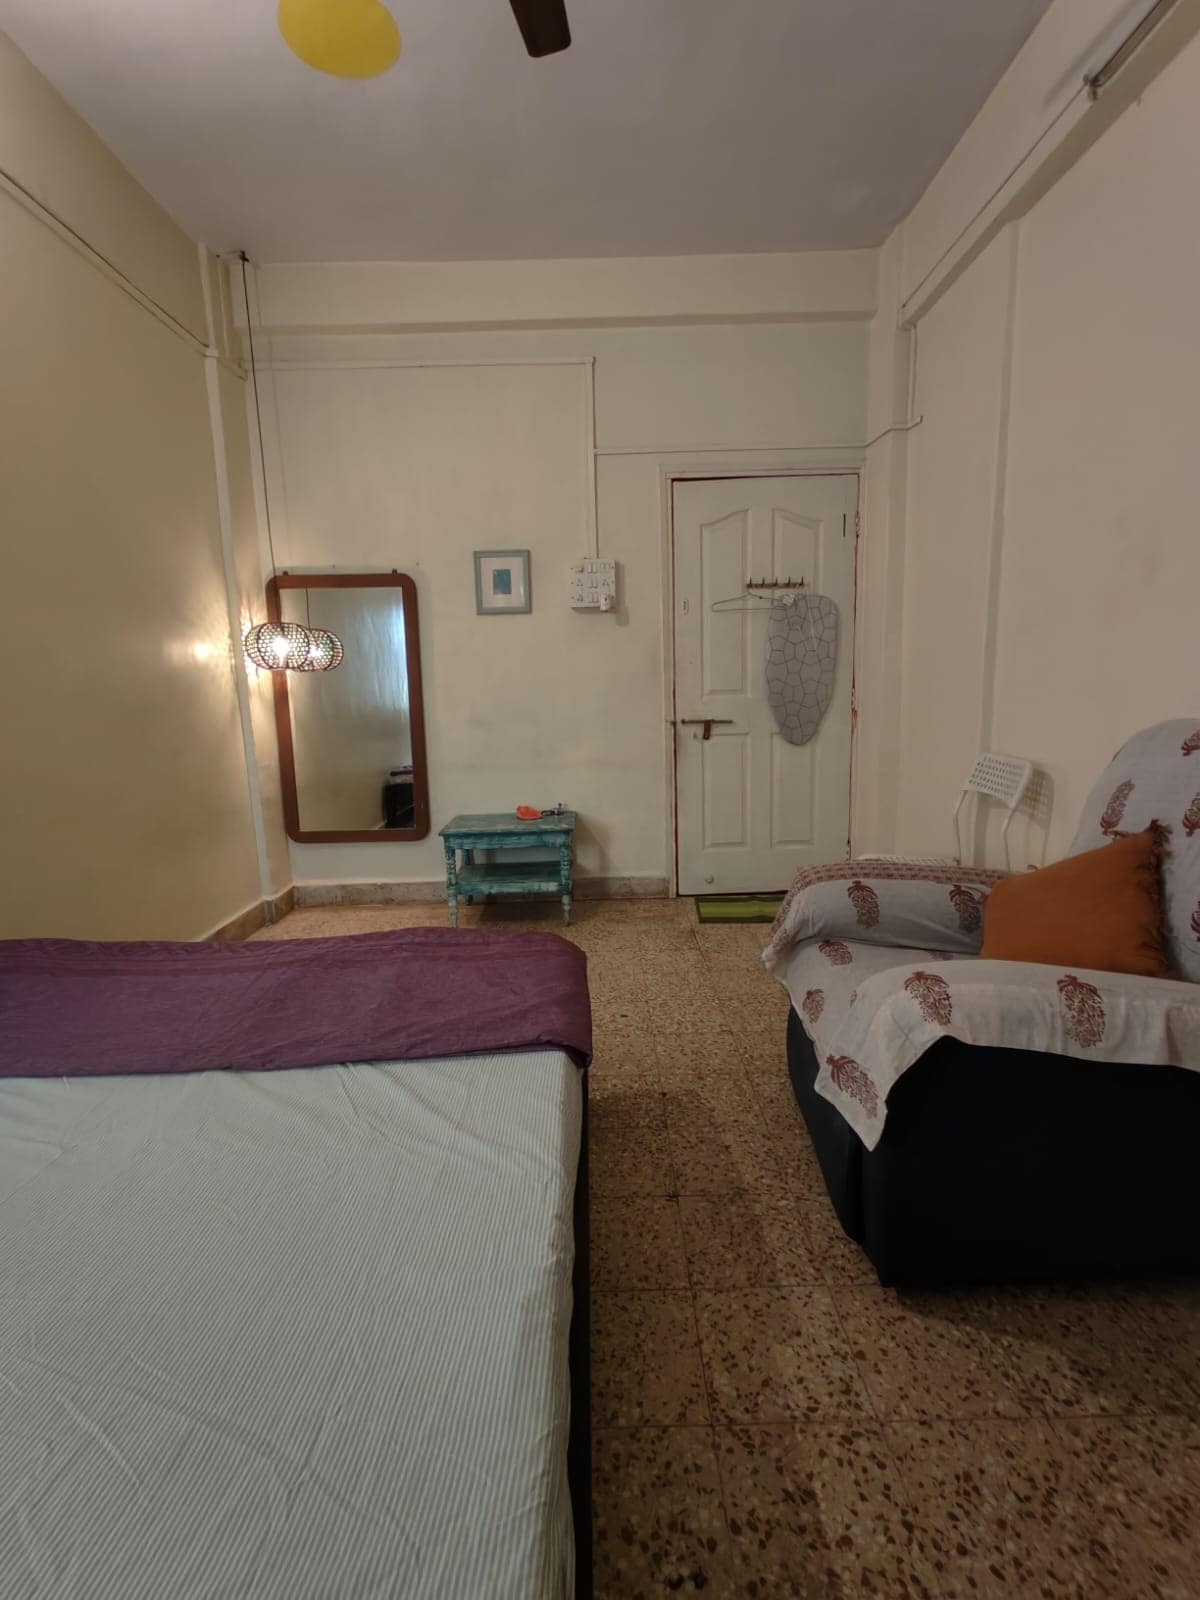 Private Room in a 3 room Flat